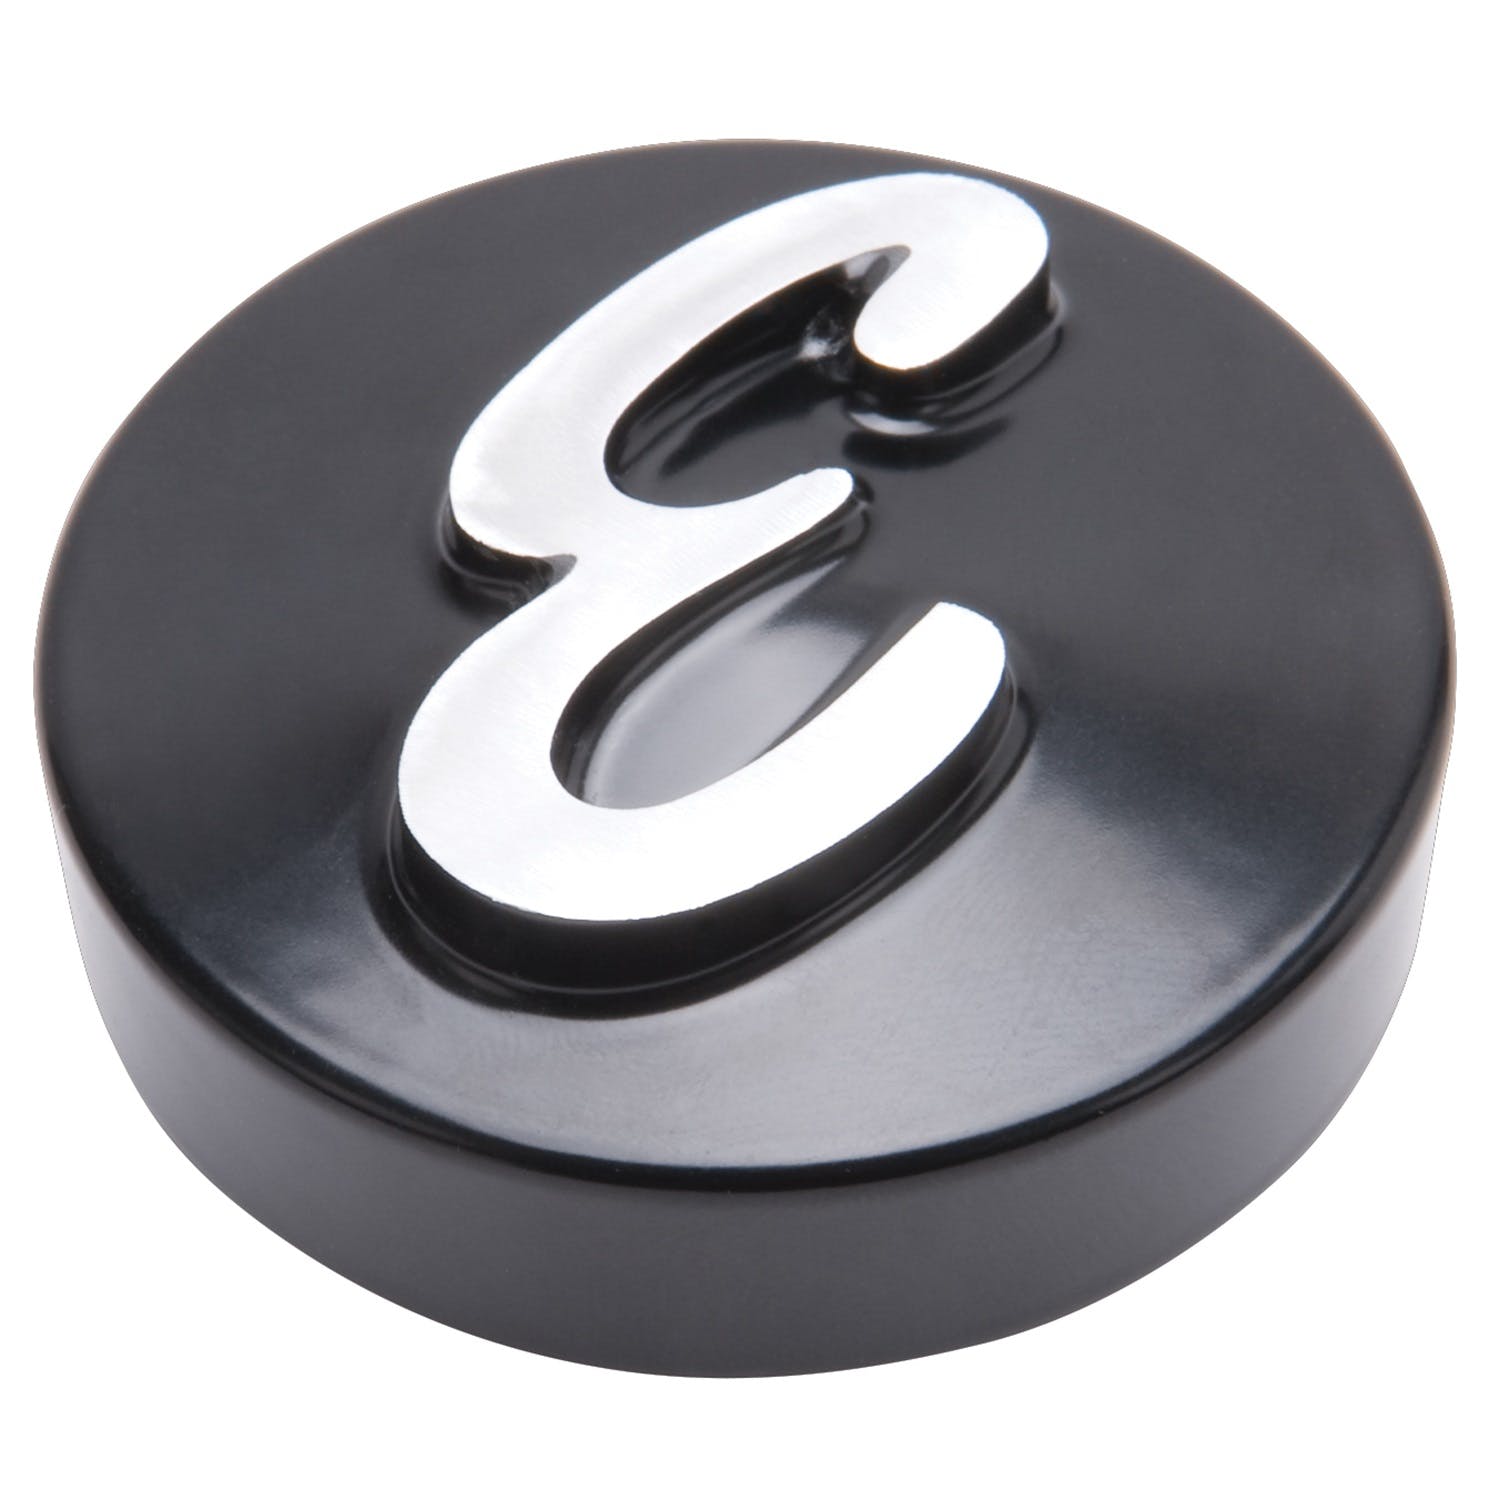 Edelbrock 4271 E Logo Black Anodized Nut (Machined E) for Pro-Flo Unv. 14 Round Air Cleaners